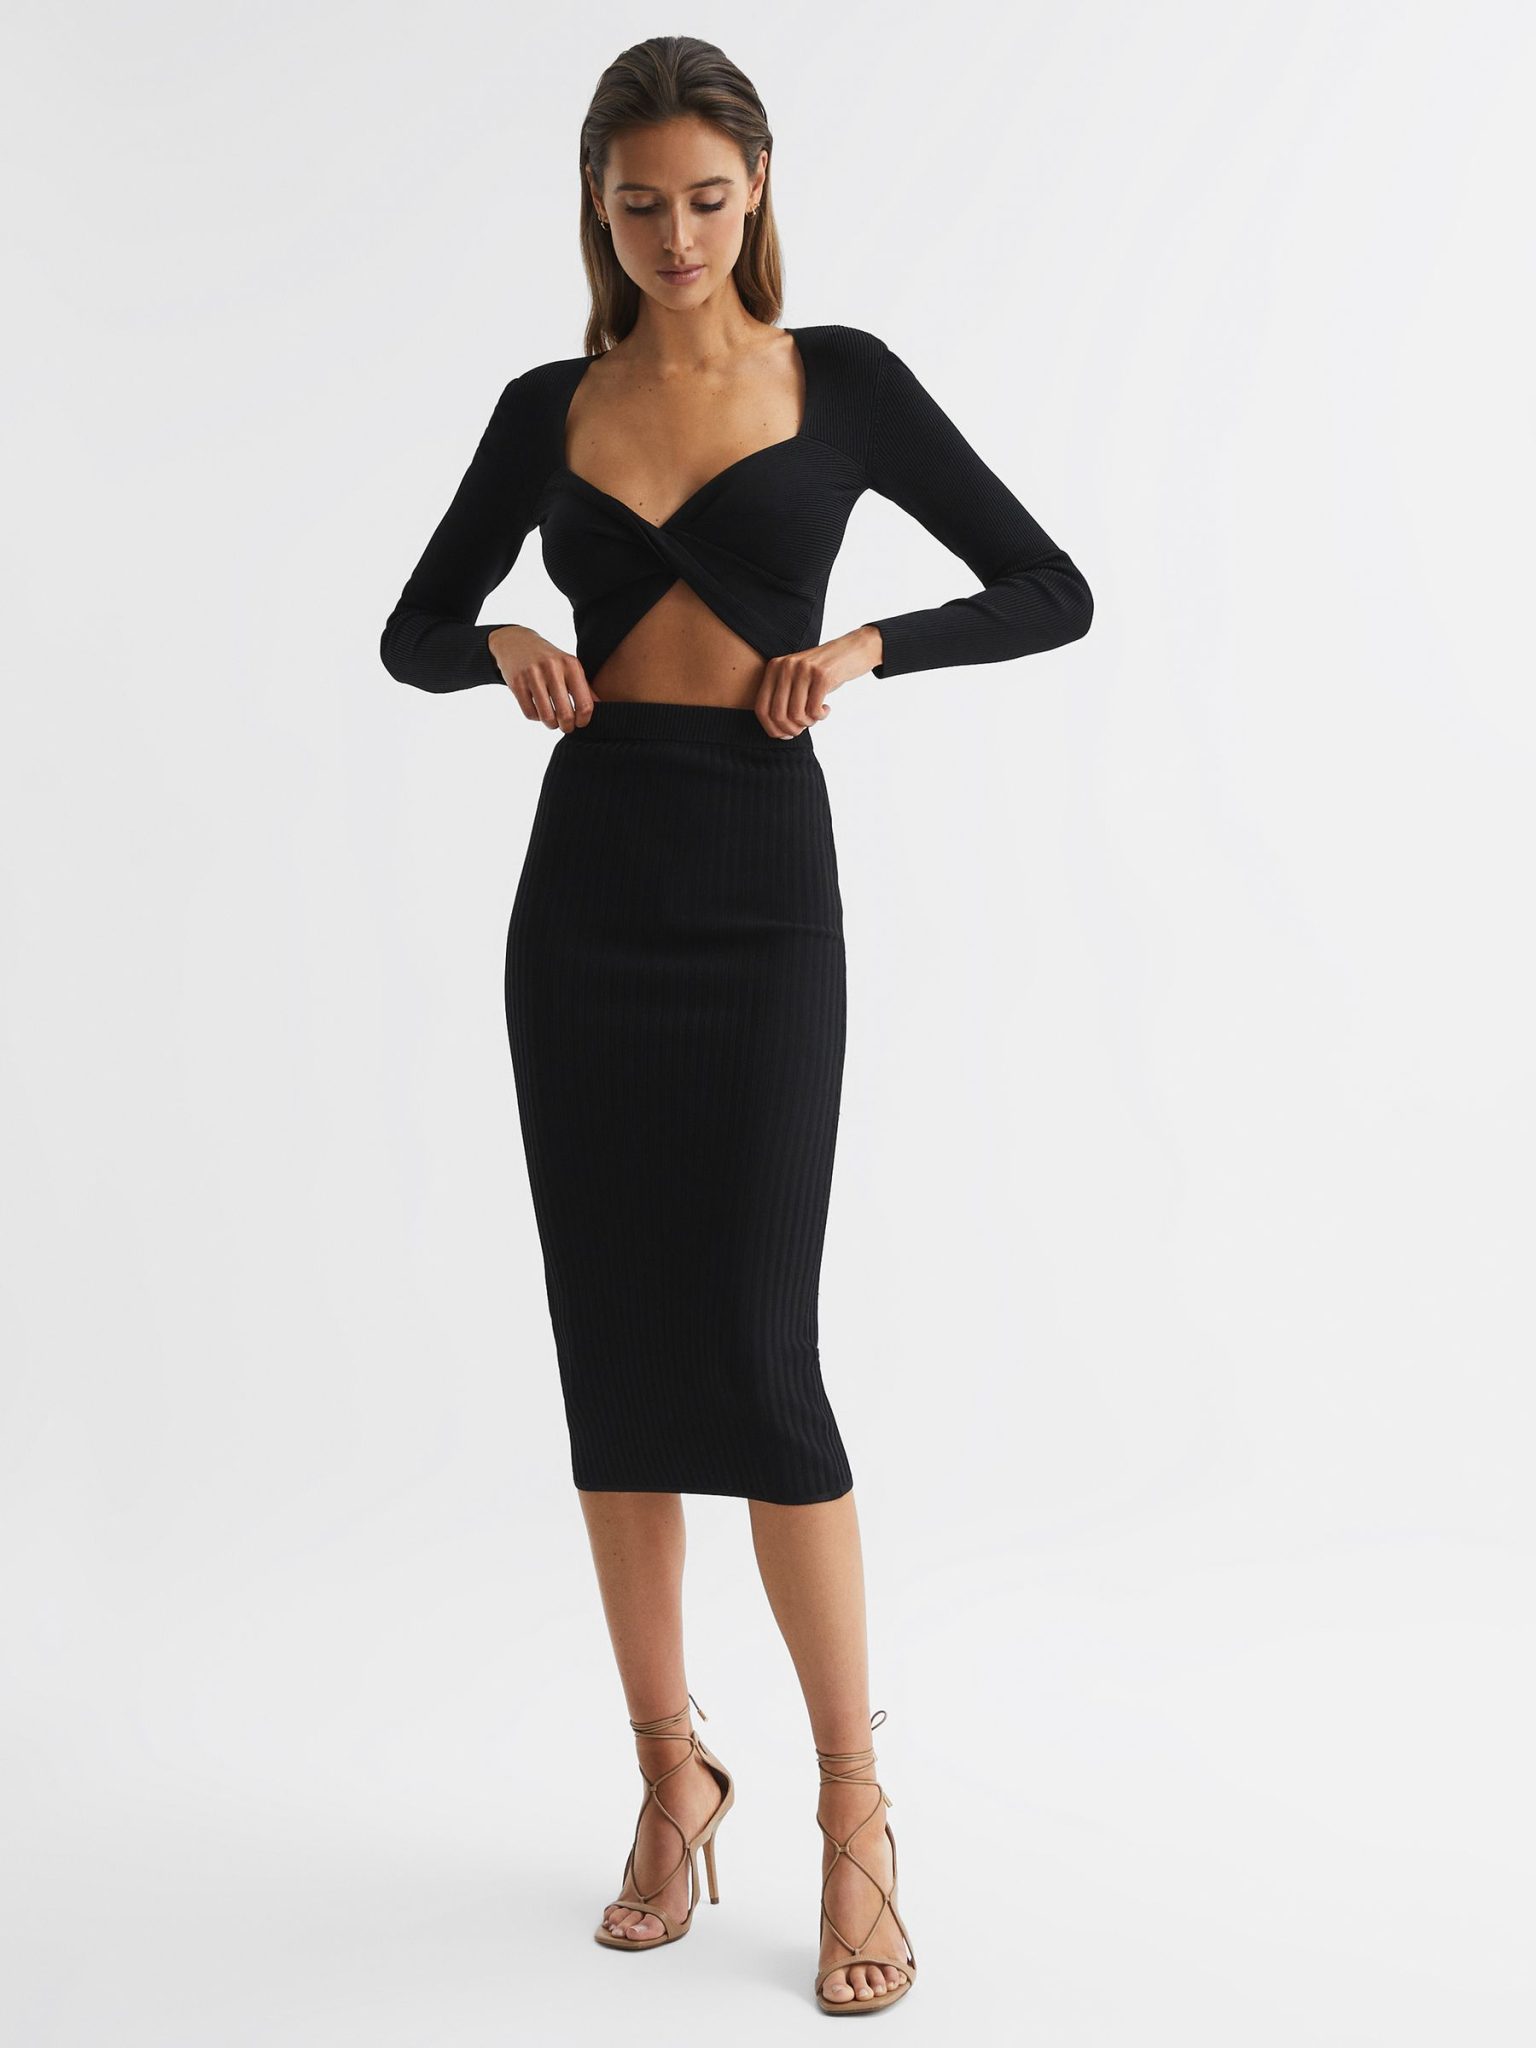 2. Reiss Iona Knitted Pencil Skirt Co-Ord